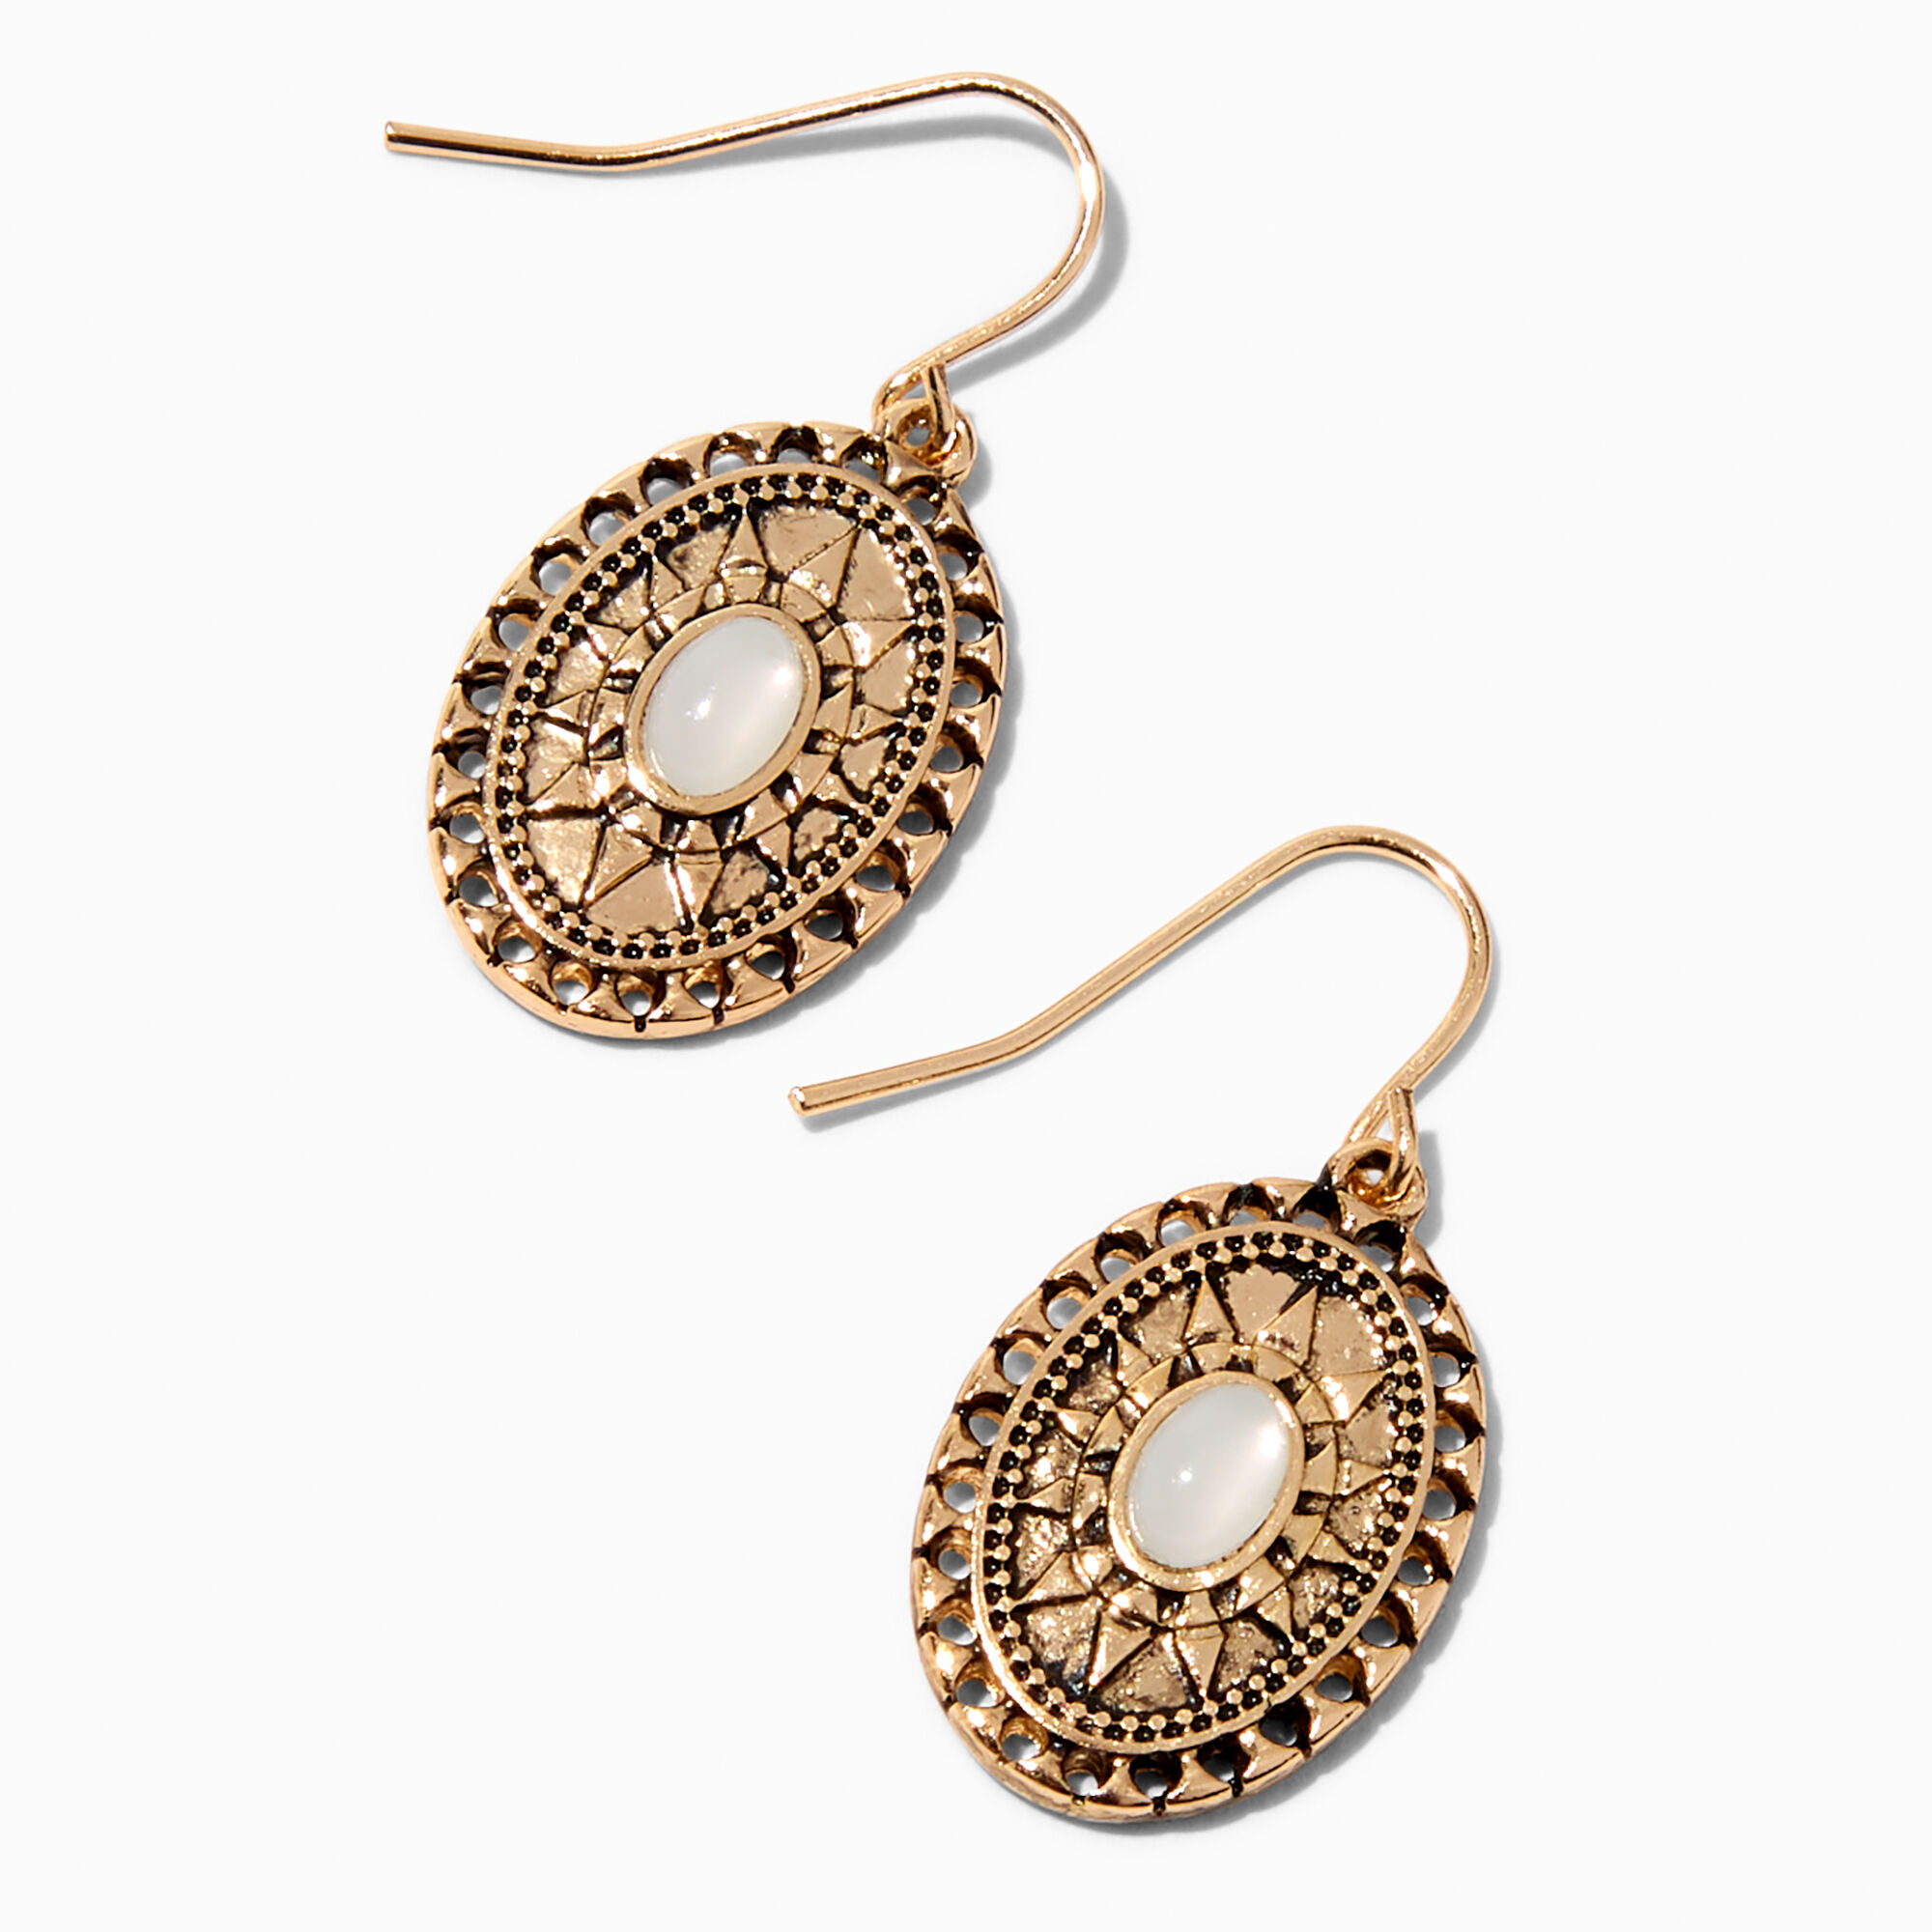 View Claires Tone Western Medallion Drop Earrings Gold information